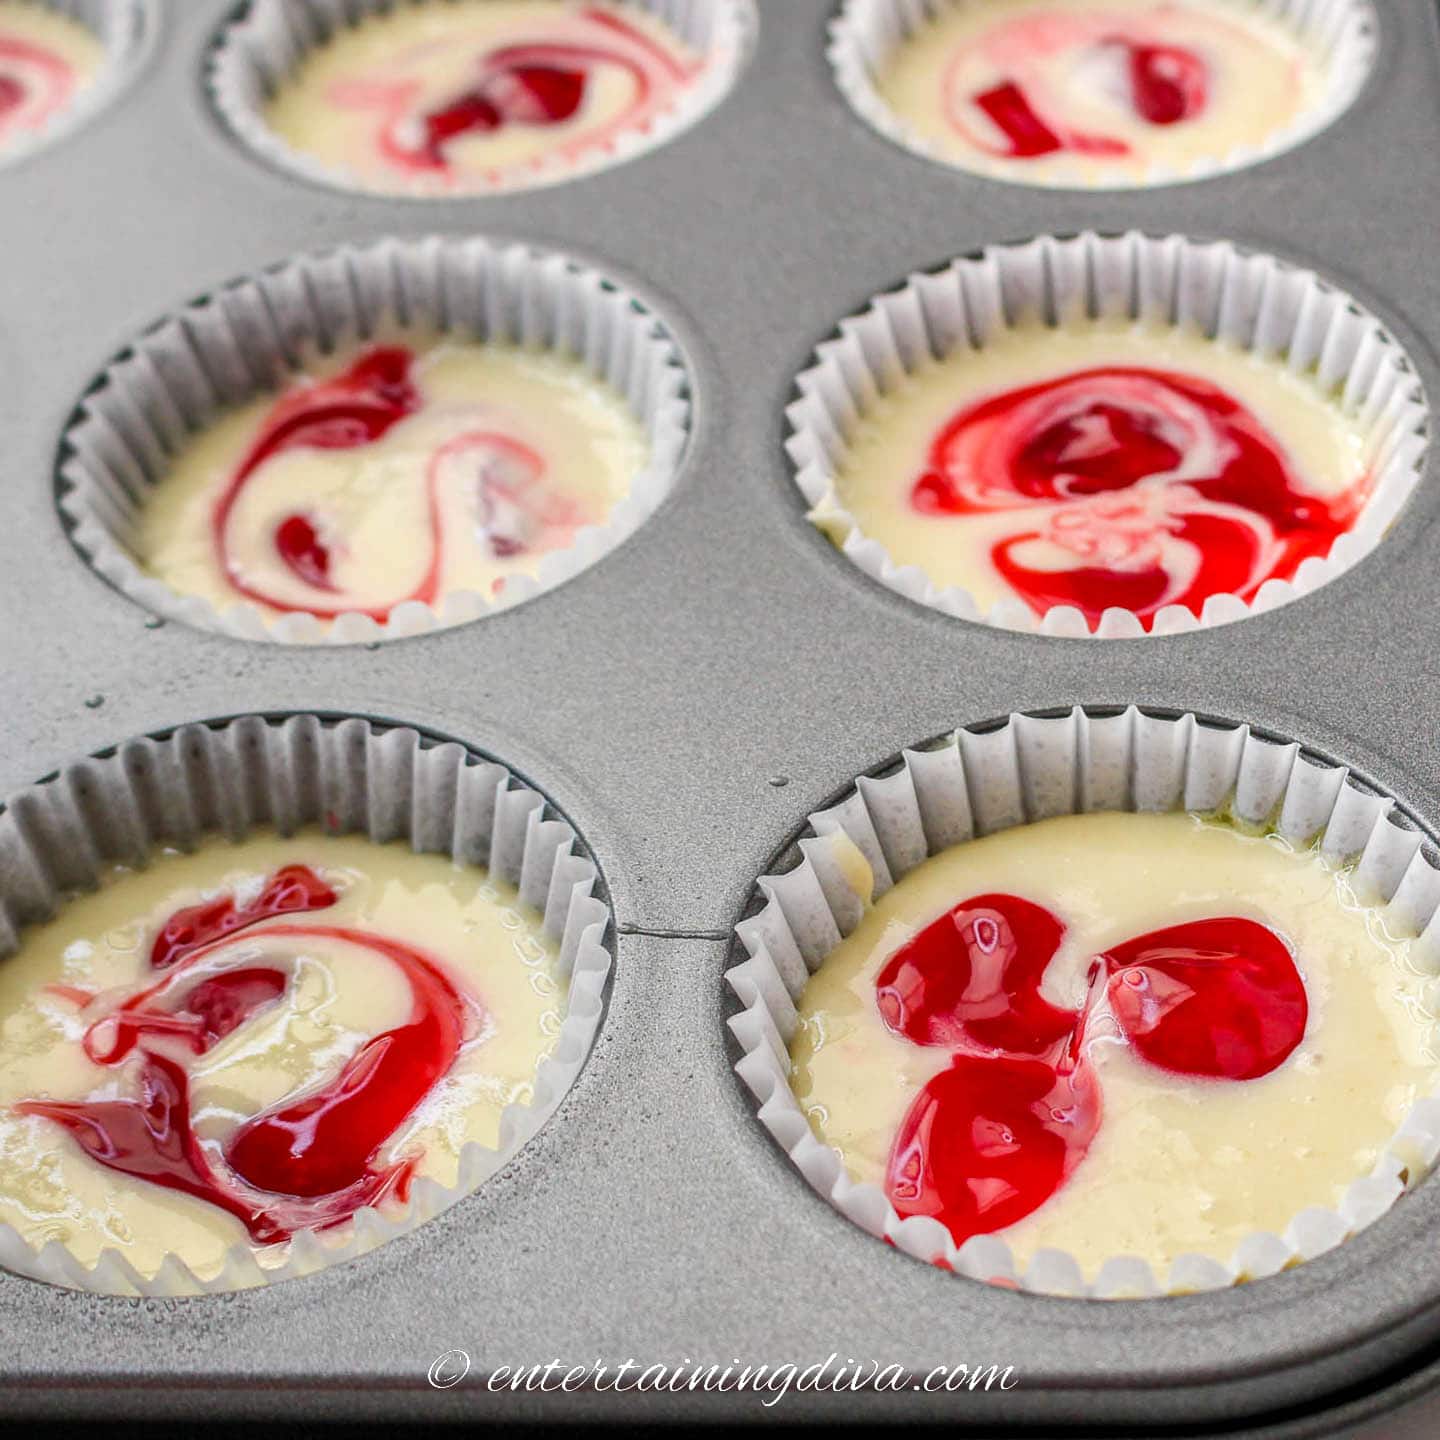 Cupcake batter in muffin tins with strawberry swirls in the top